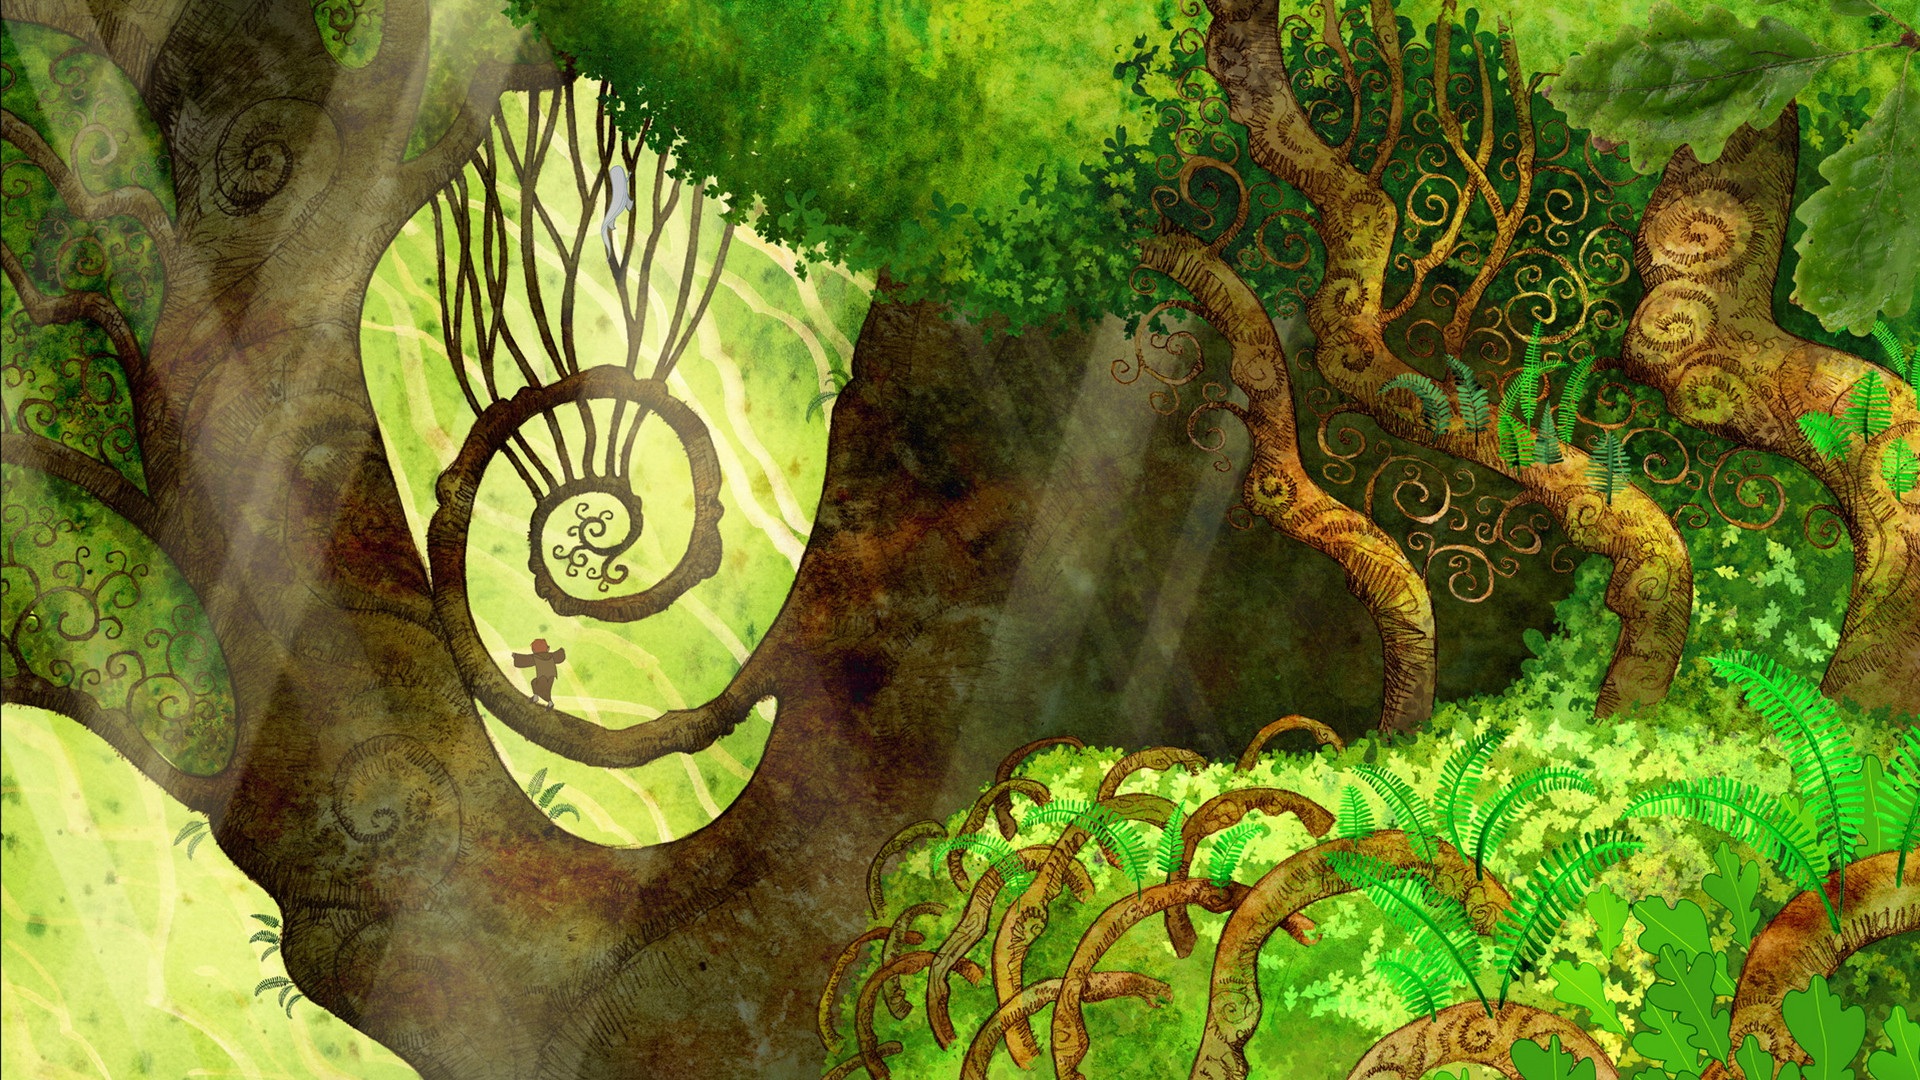 8 The Secret Of Kells HD Wallpapers | Backgrounds - Wallpaper Abyss